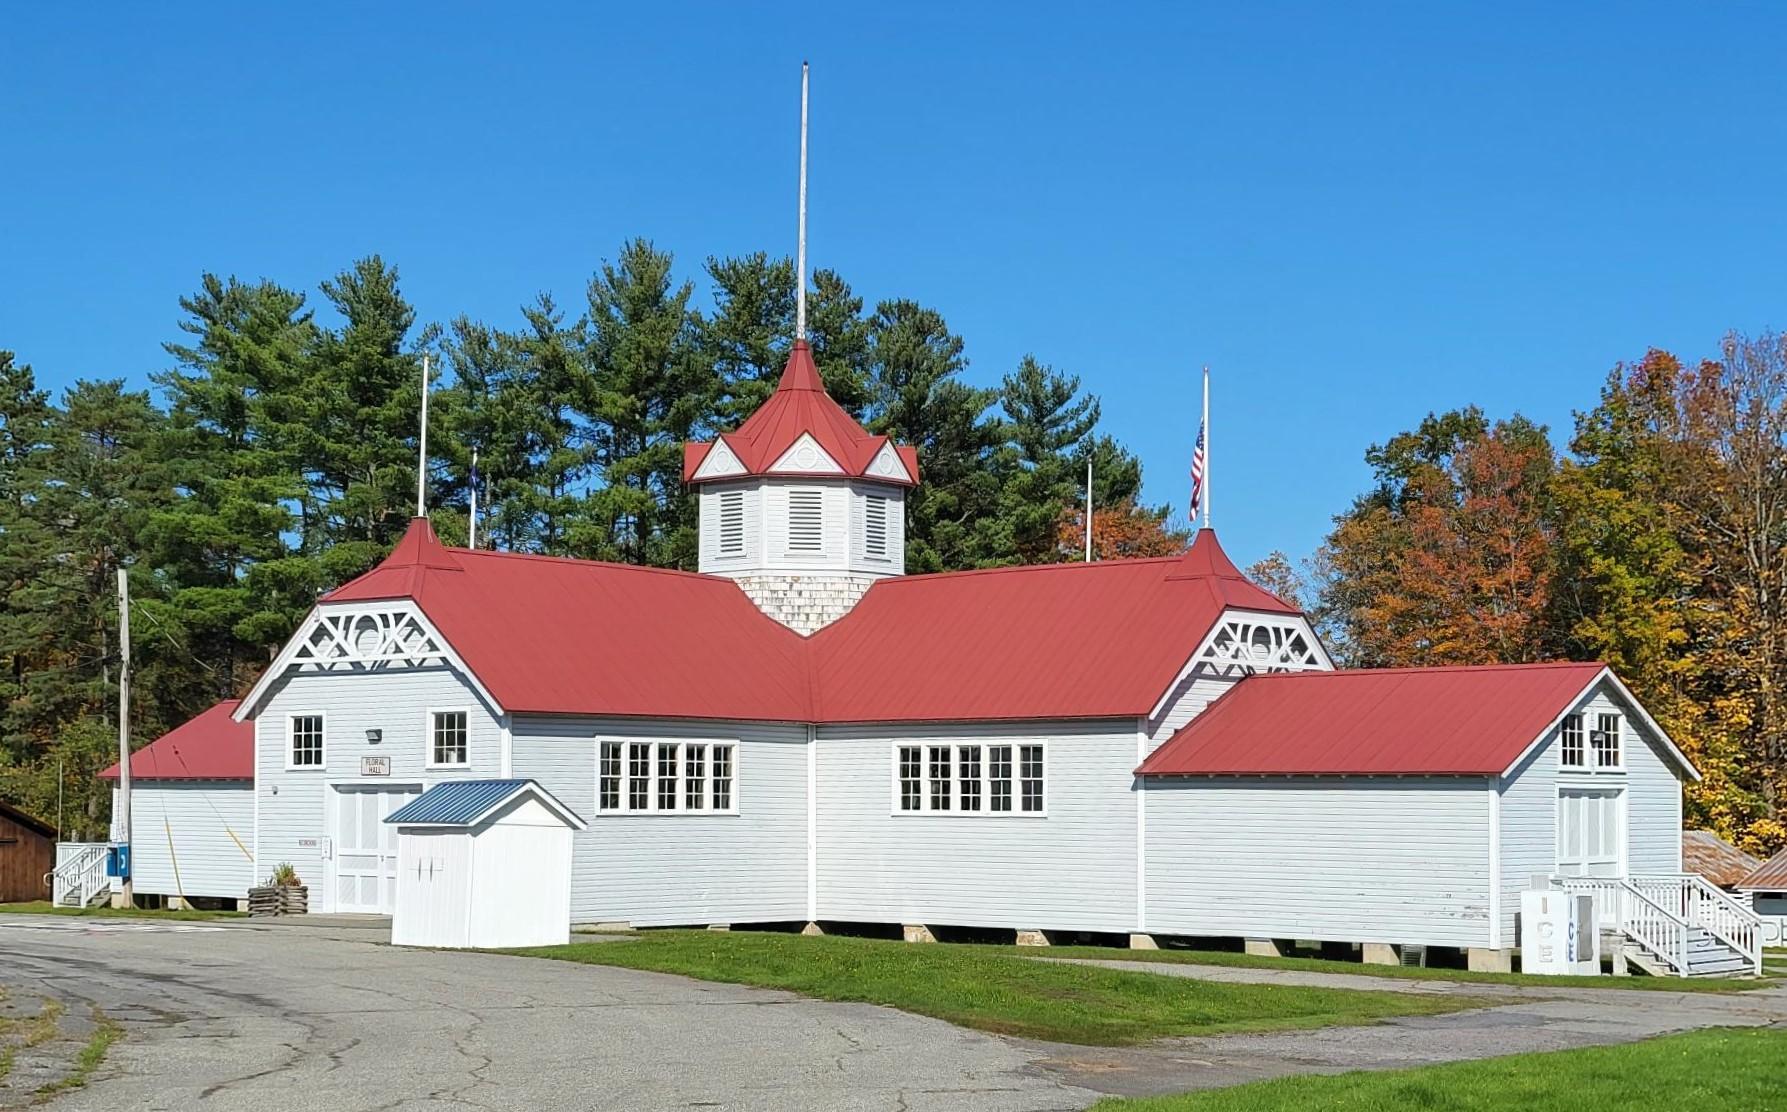 Exterior view of Floral Hall on the Essex County Fairgrounds in Westport